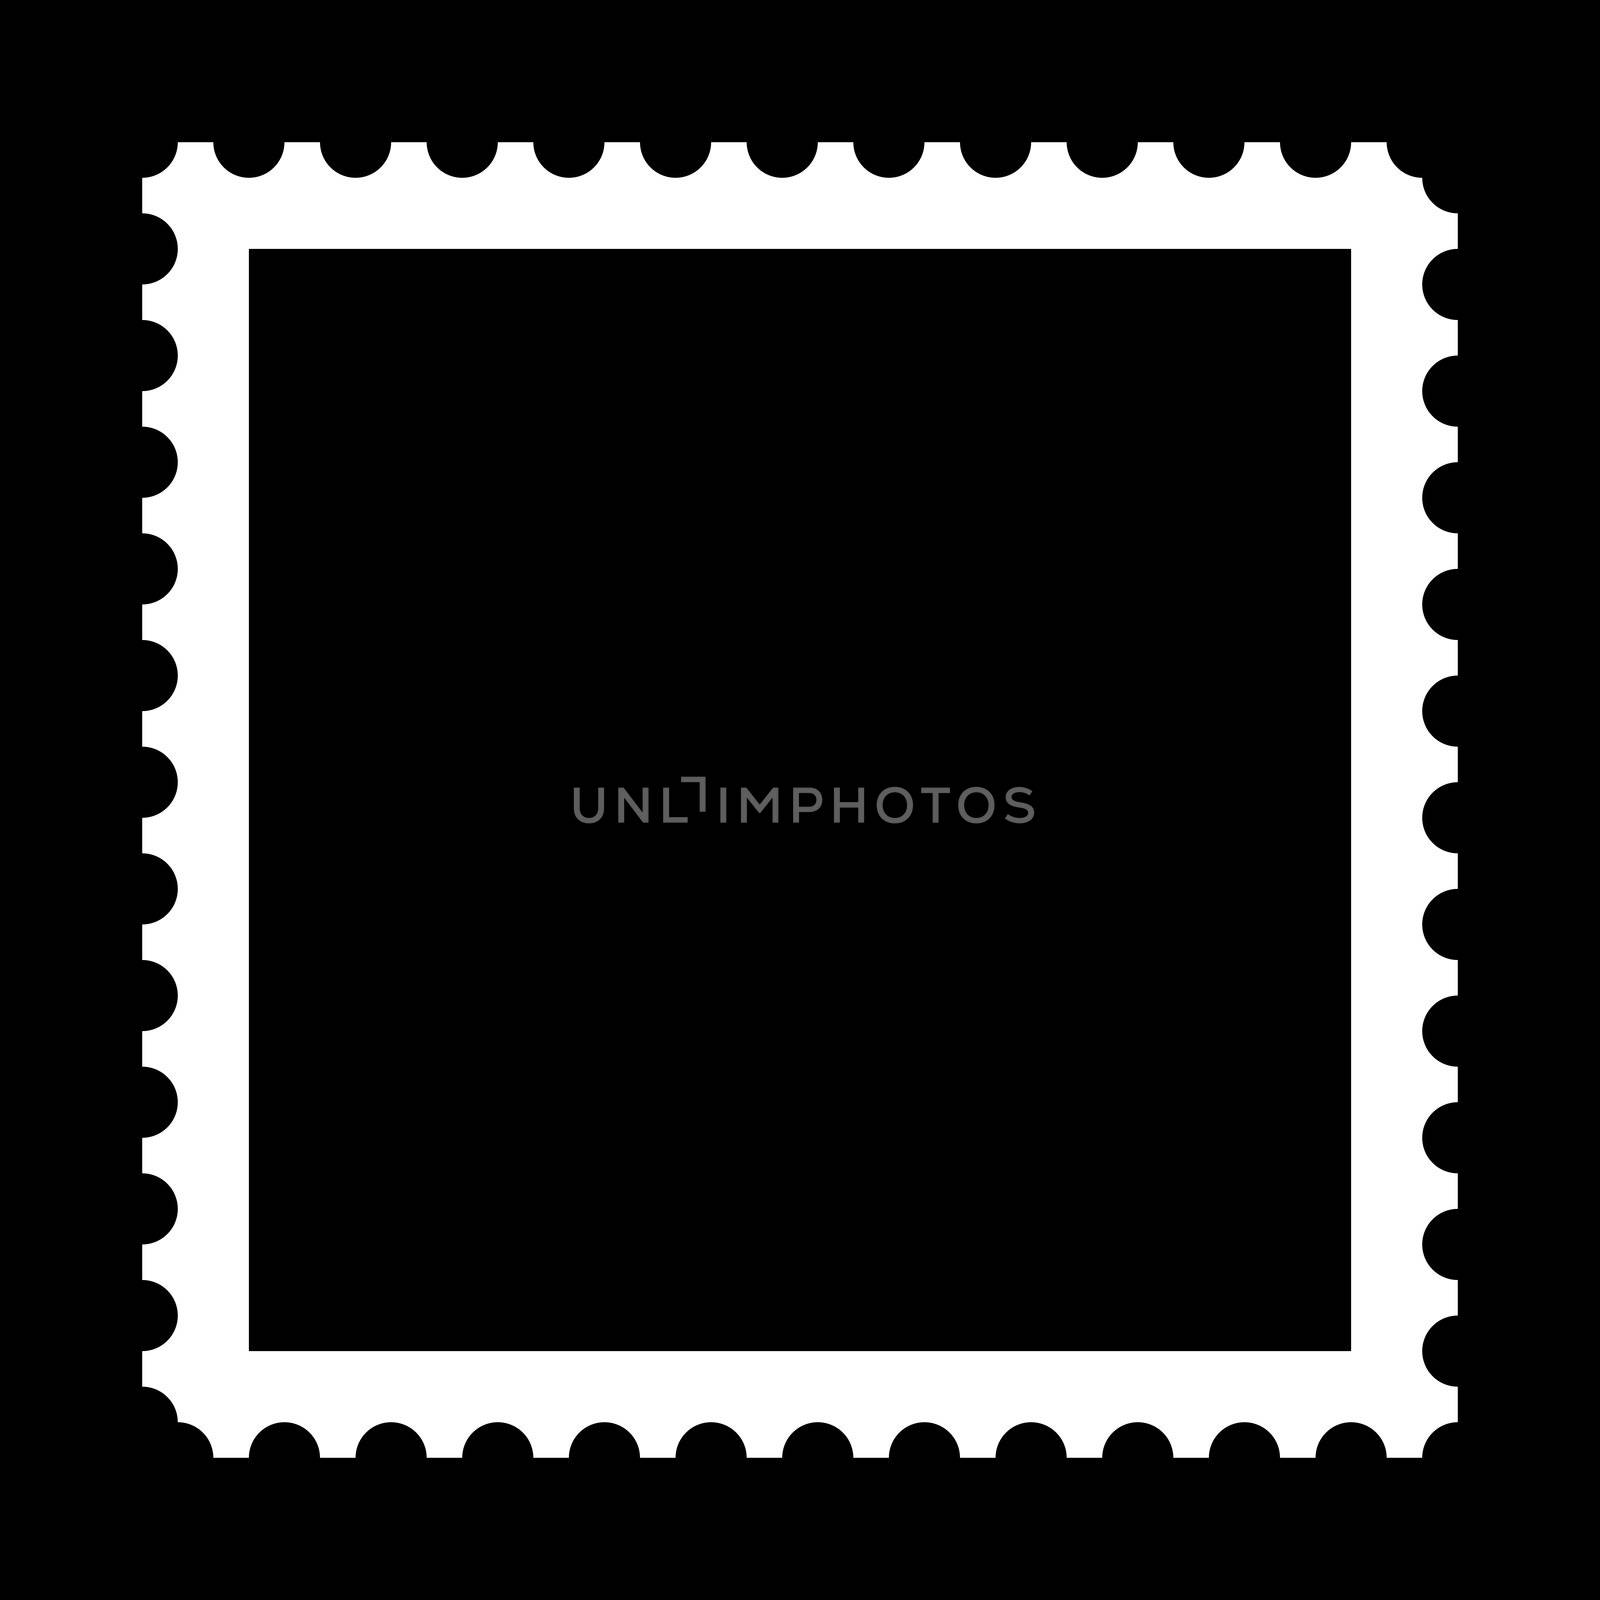 Square stamp with copy space on black background